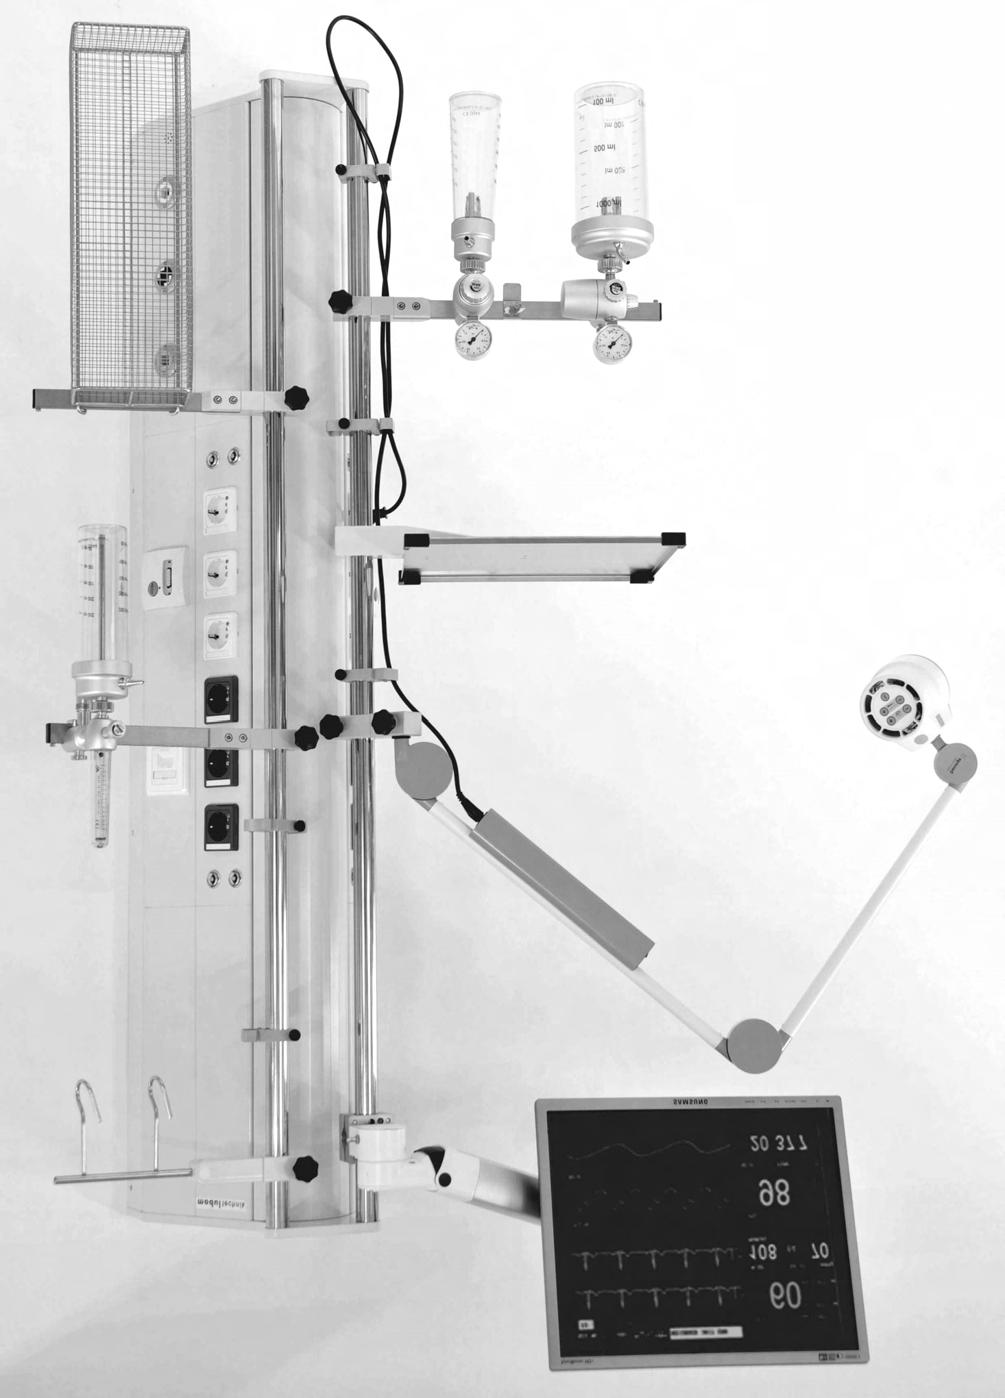 38 Accessories fig. 104: an example of a supply unit equipped in a modular construction.